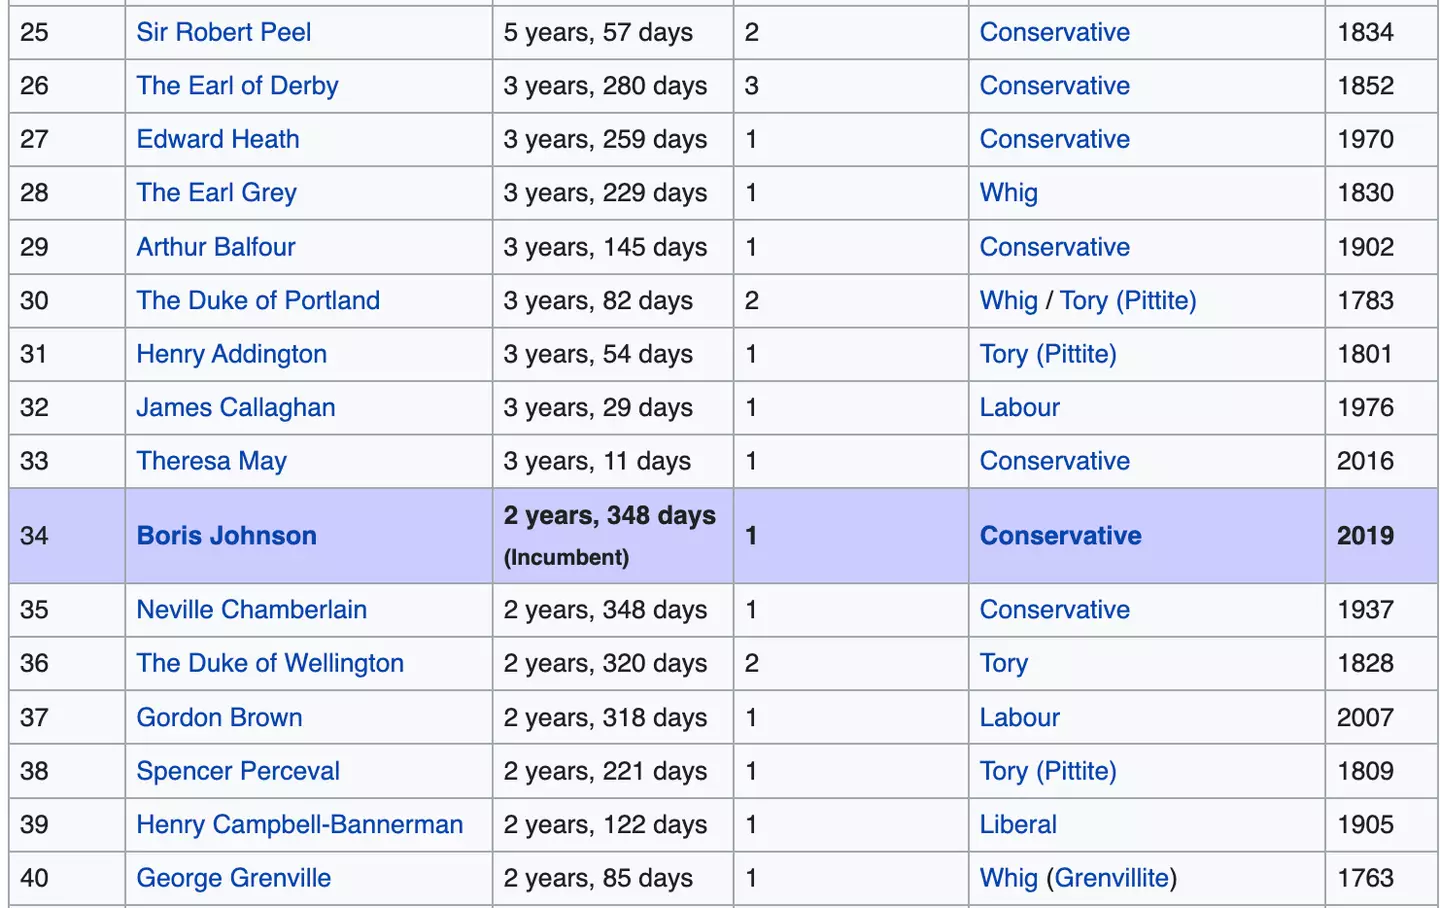 Boris Johnson has ranked 35th in a list of prime ministers of the United Kingdom by length of tenure.